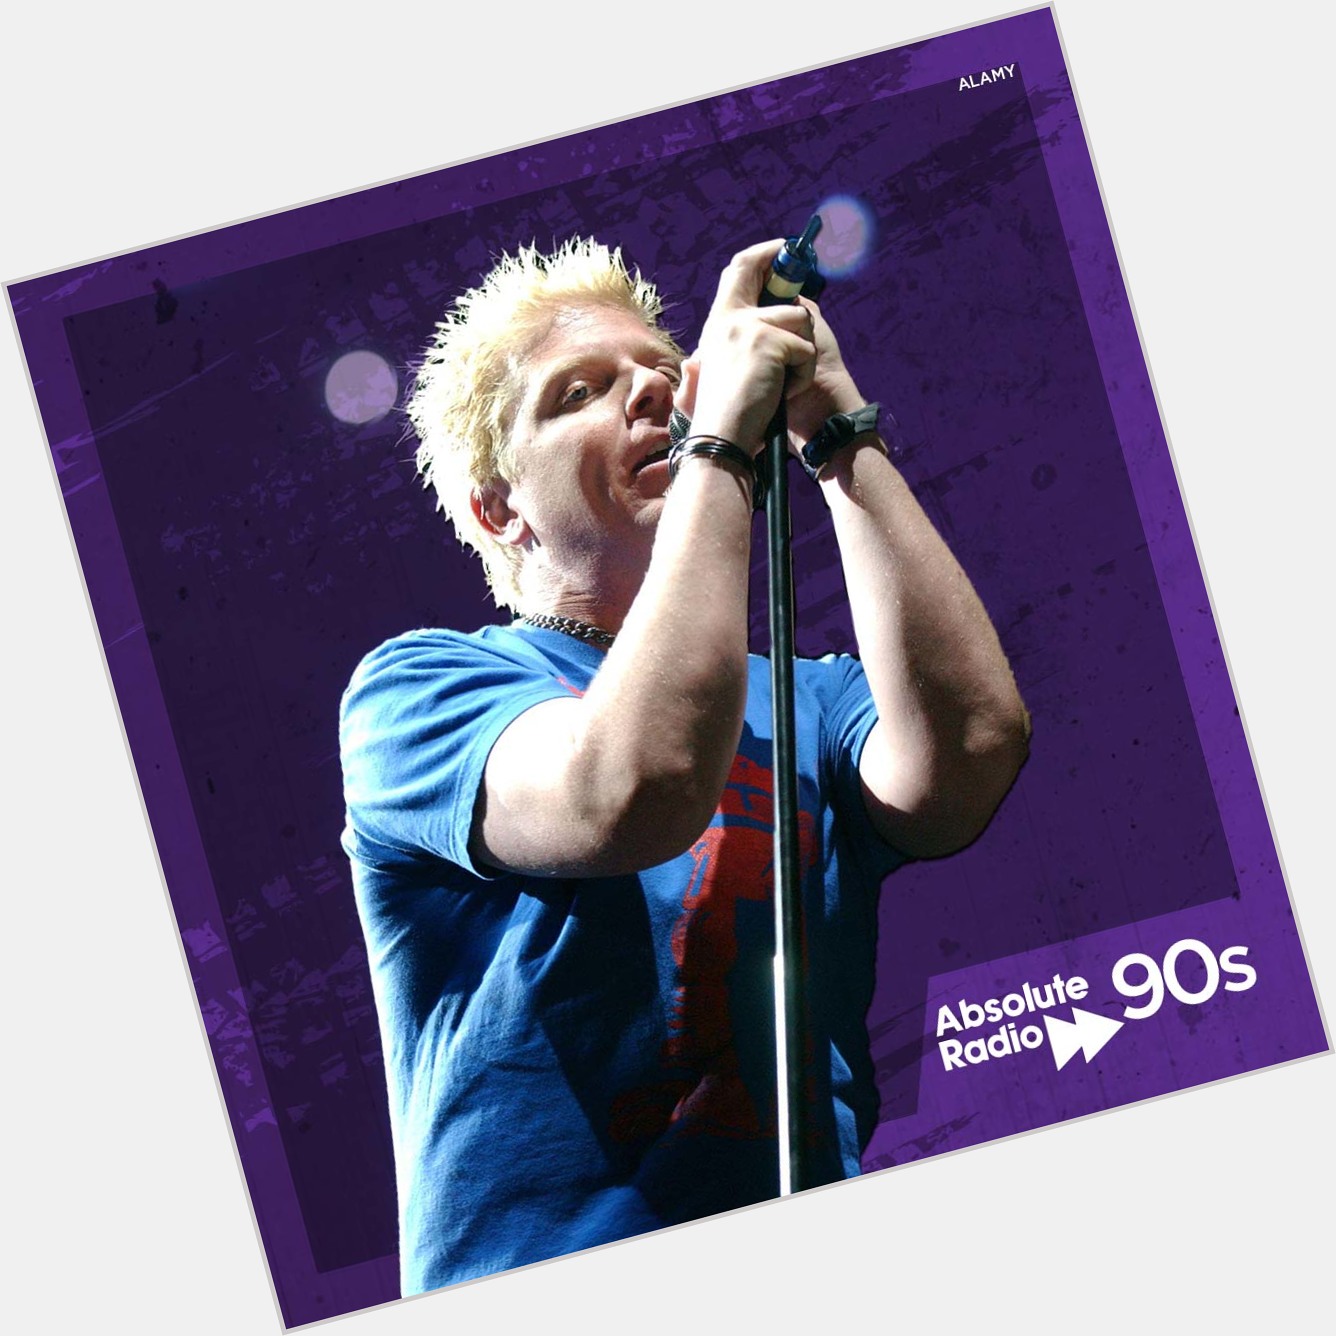 Happy birthday to The Dexter Holland! The punk rocker is 56 today. 